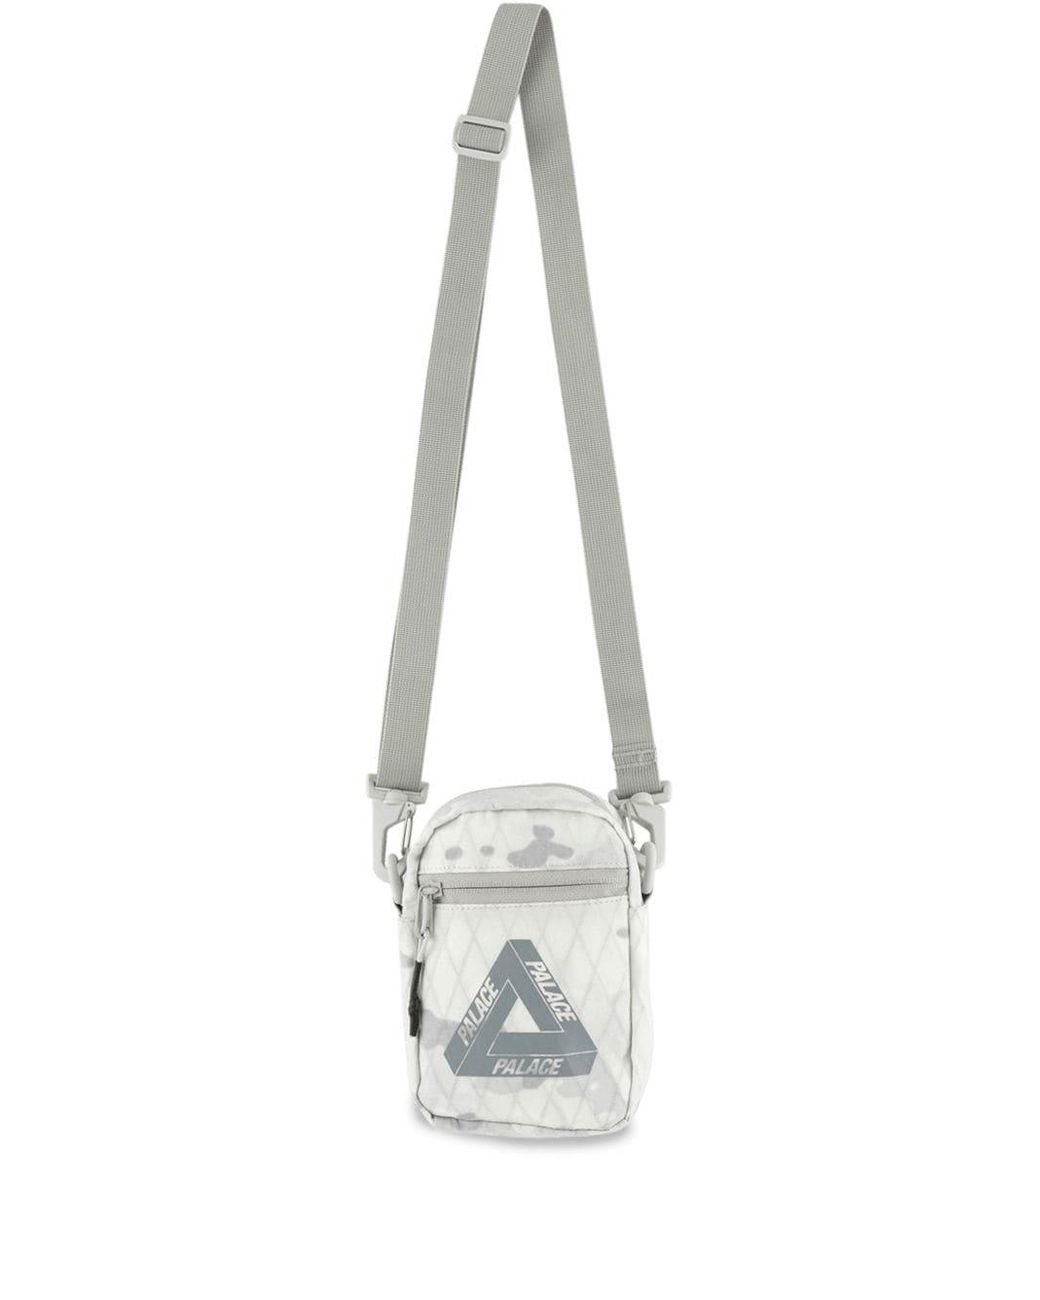 White Patch Monogram Paalun Bag